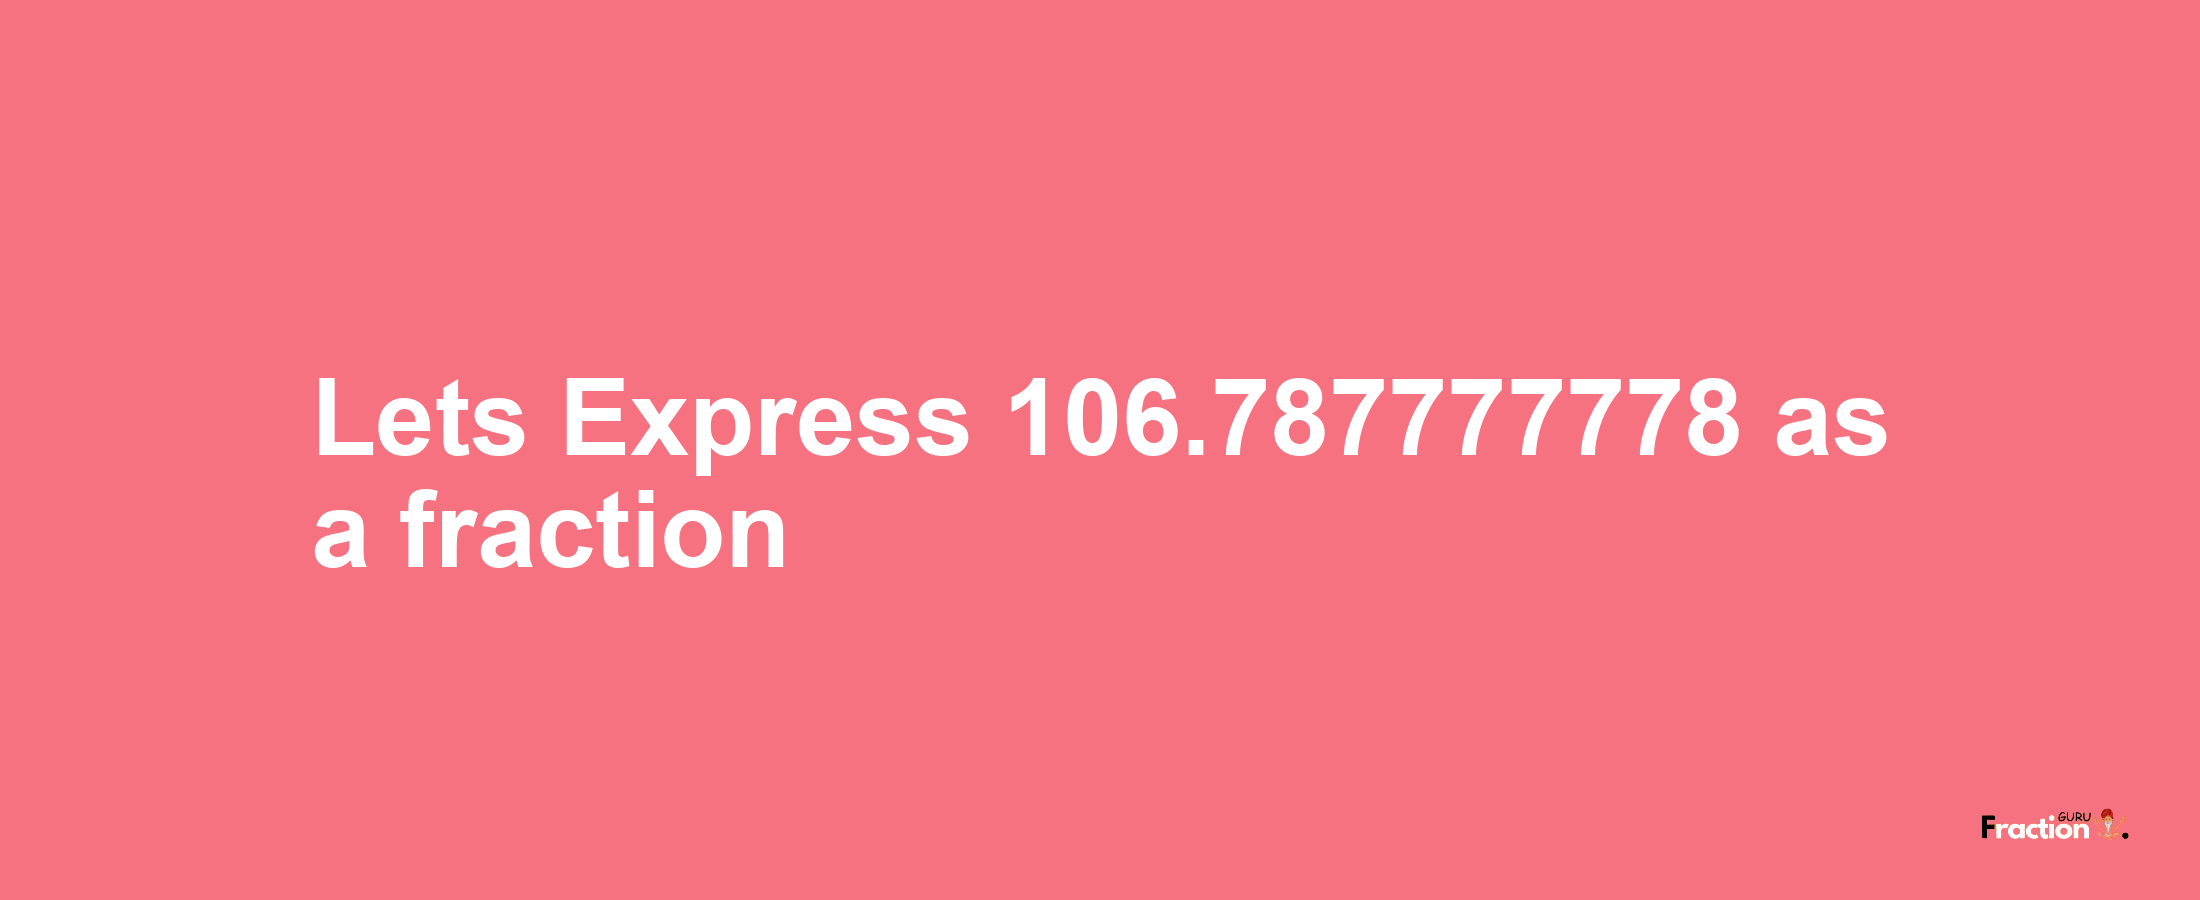 Lets Express 106.787777778 as afraction